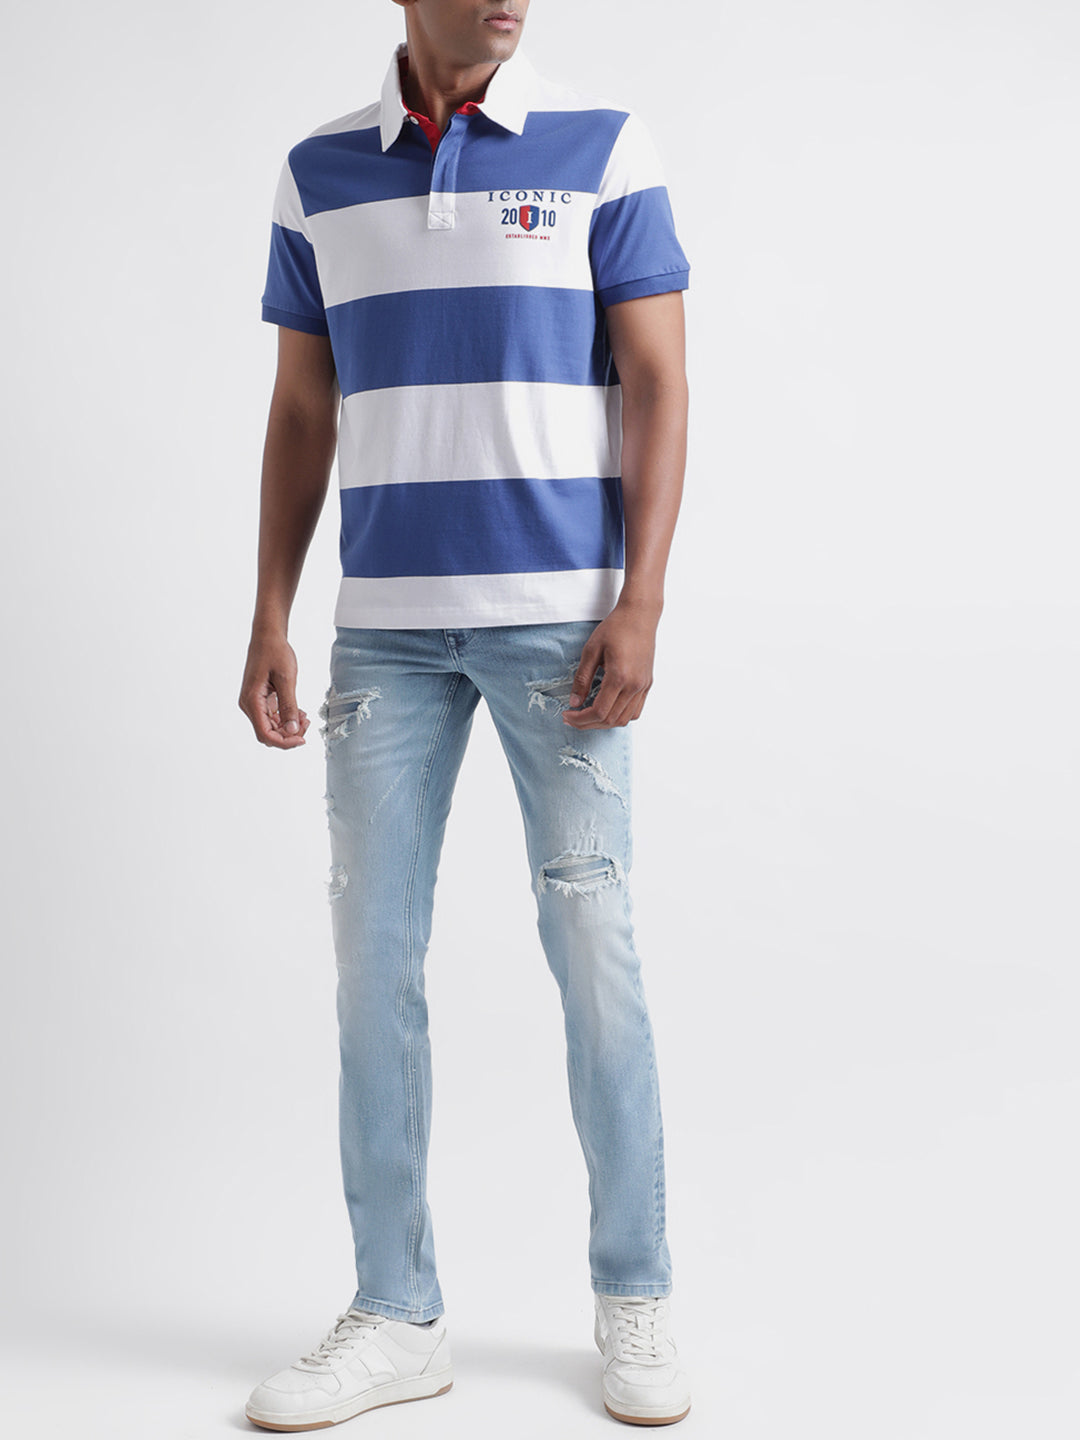 Iconic Multi Striped Regular Fit Polo T-Shirt